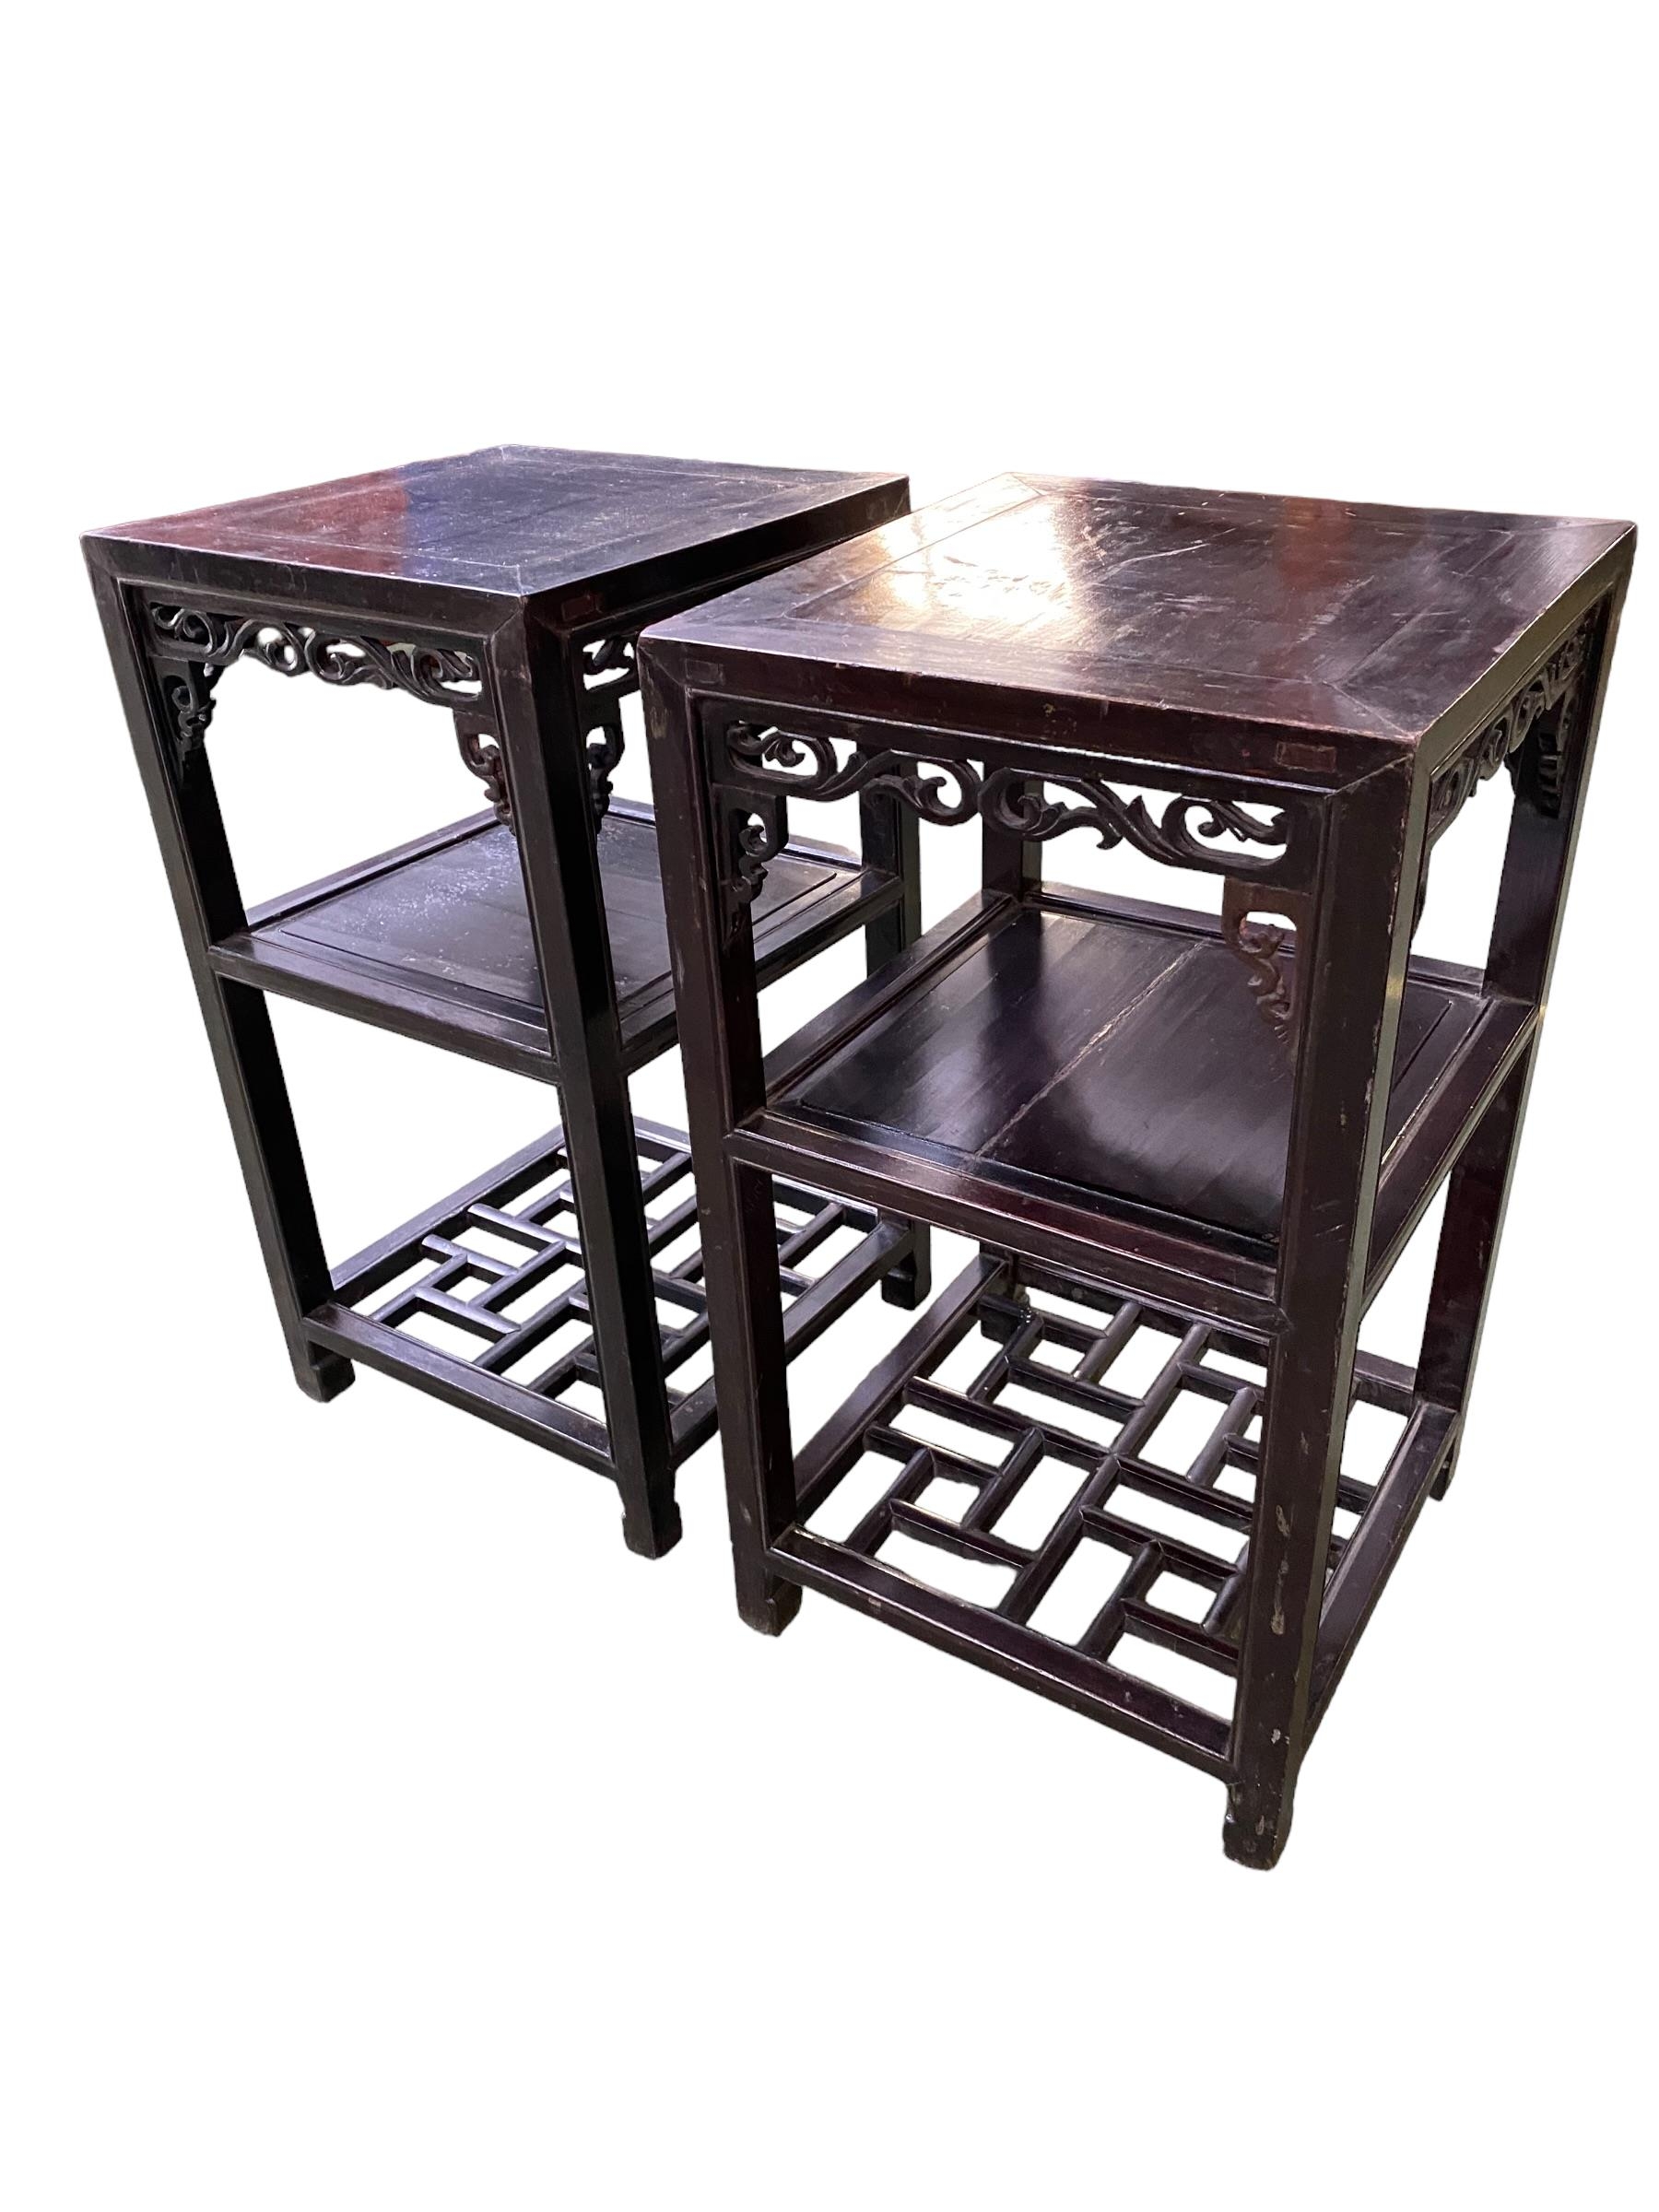 A pair of C19th/C20th Chinese hardwood side tables, carved frieze and fretwork stretcher base, 79